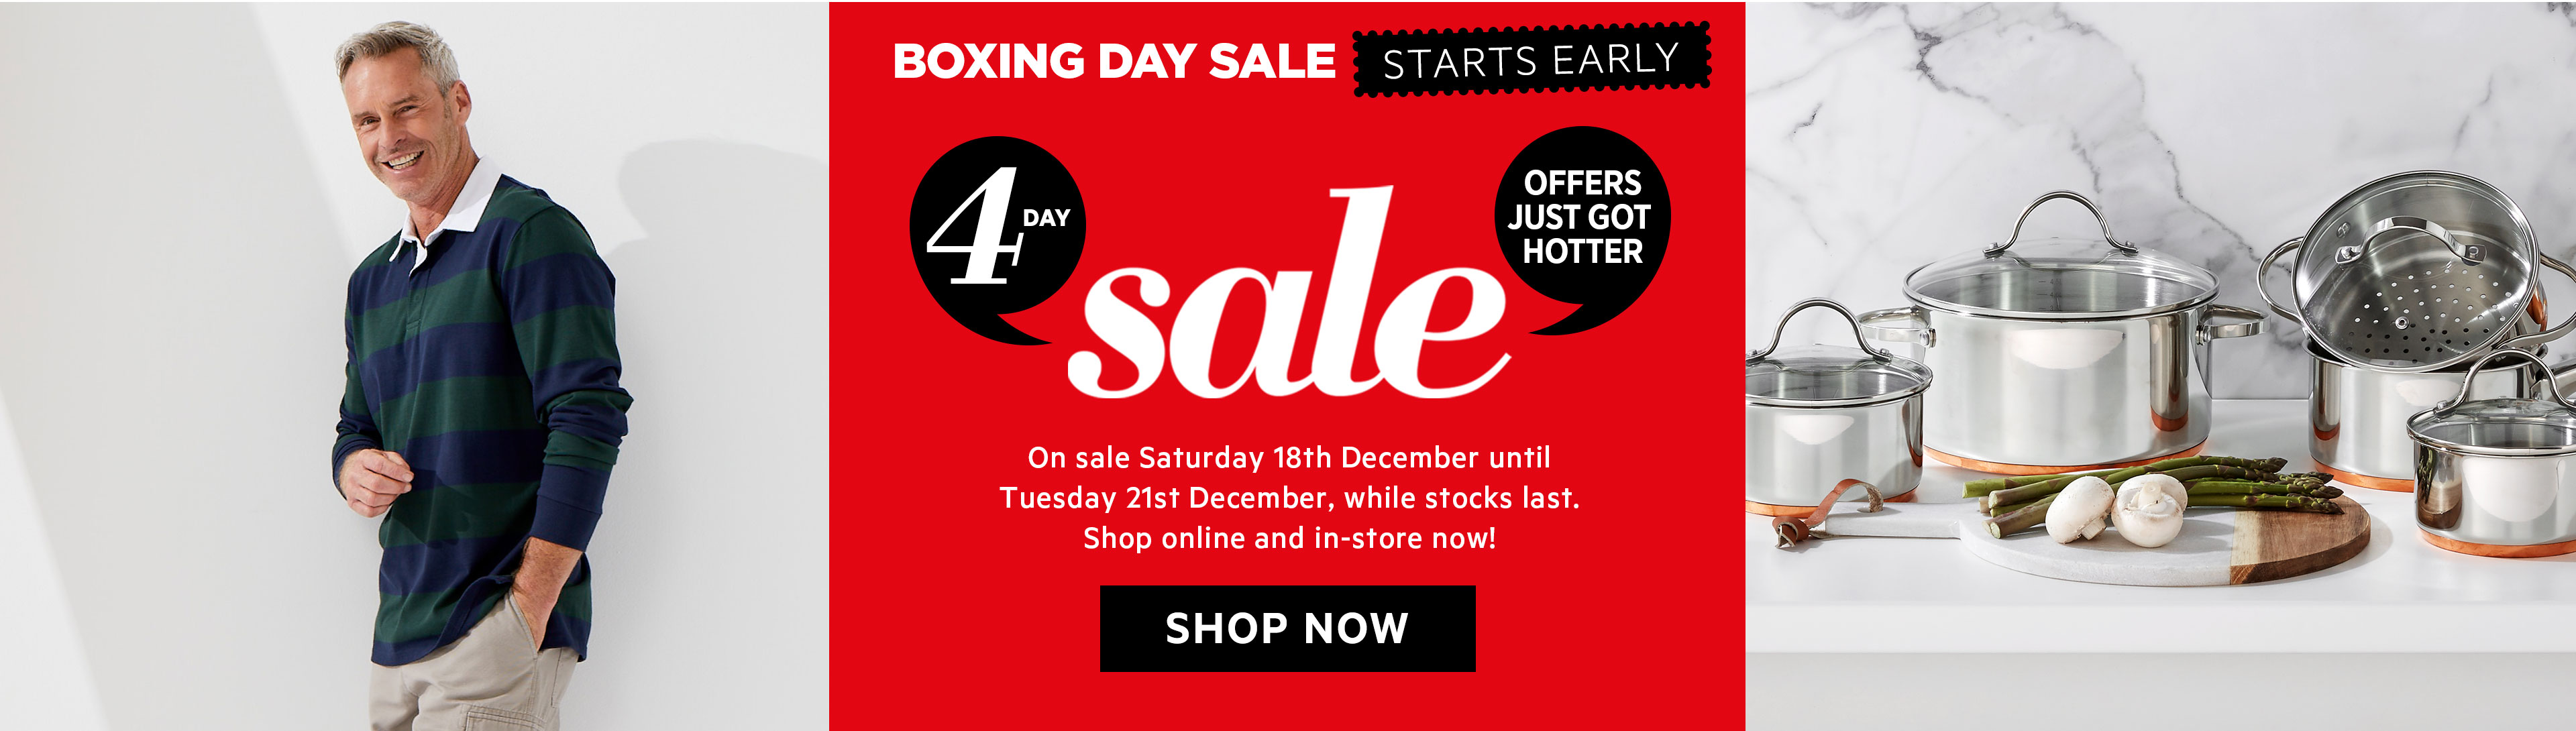 Harris Scarfe Boxing Day sale up to 60% OFF on kitchenware, clothing, footwear & more